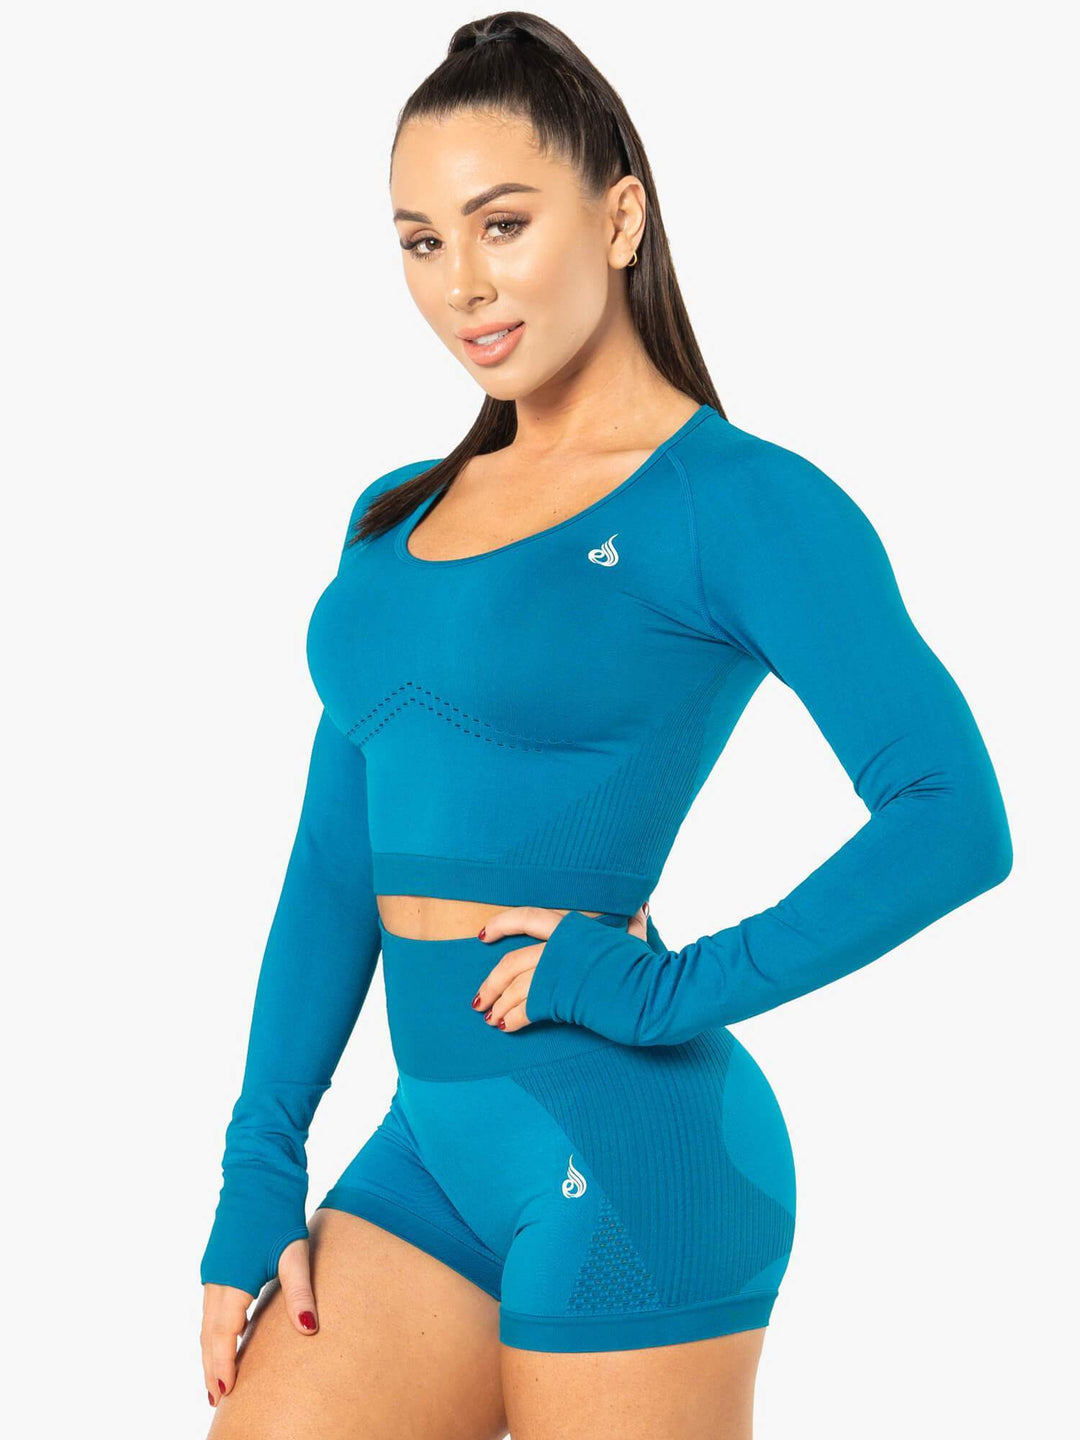 Electra Seamless Long Sleeve Crop Top - Electric Blue Clothing Ryderwear 